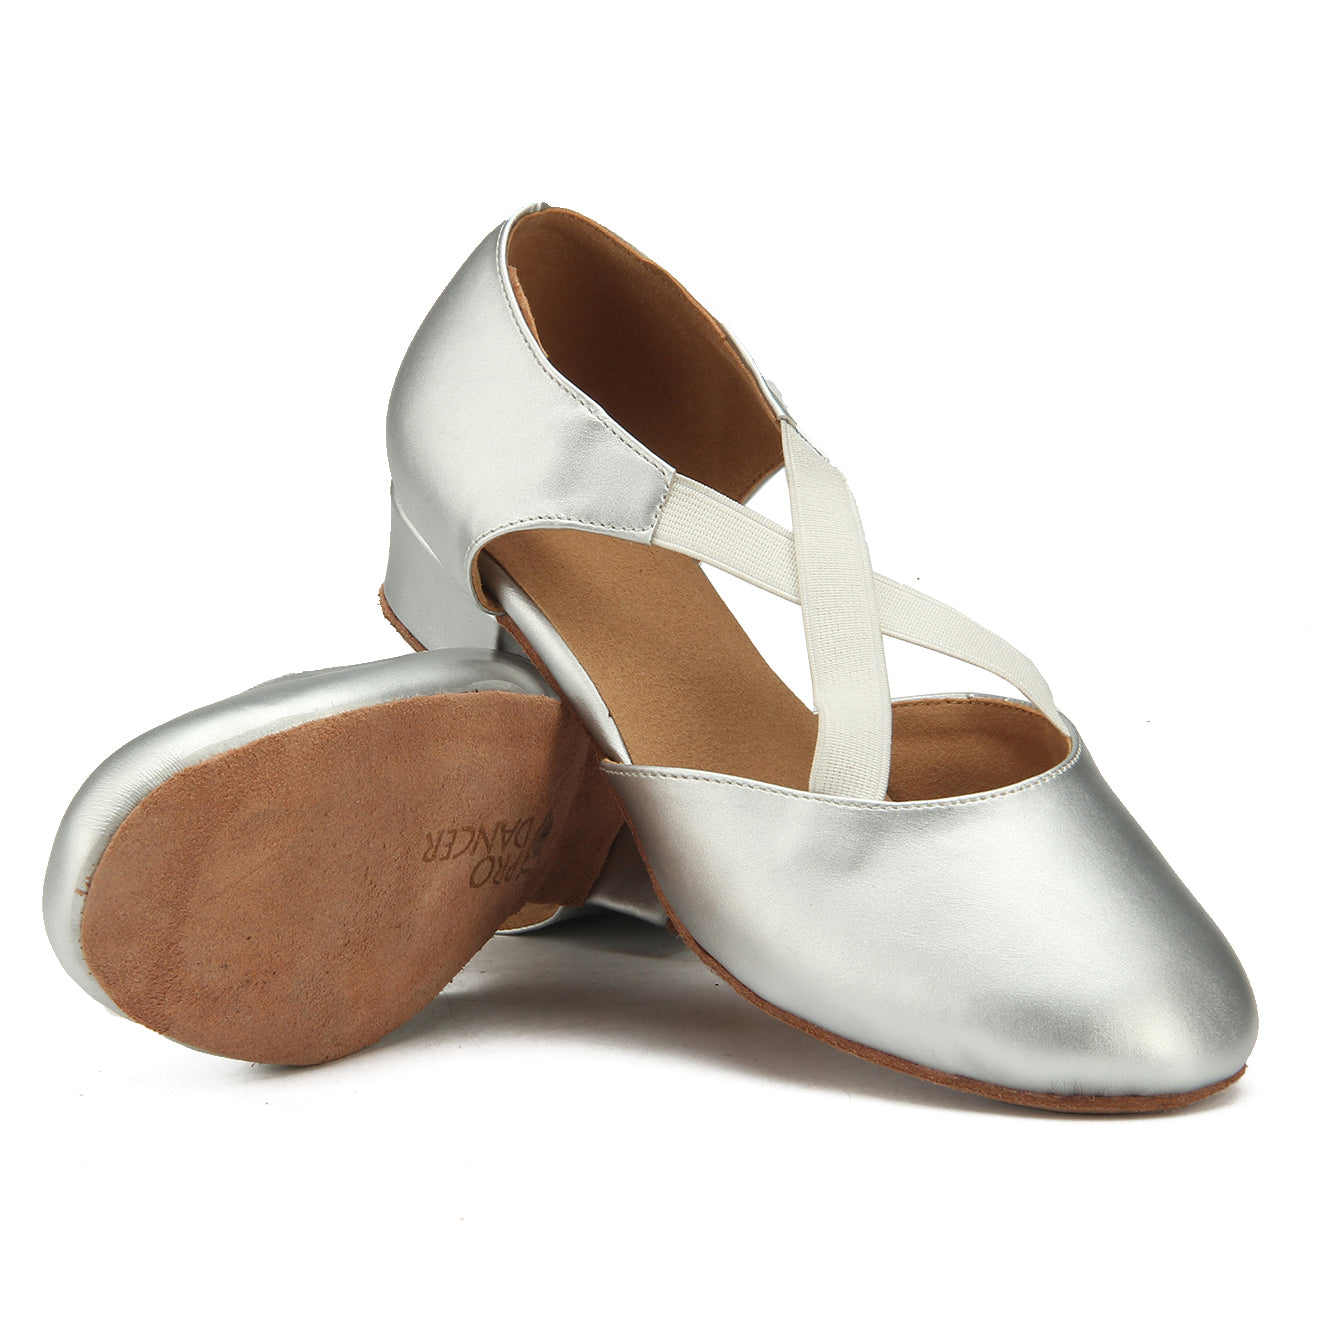 Women Ballroom Dancing Shoes with Suede Sole, Closed-toe Silver Tango Latin Practice Dance Shoe for Ladies (PD7307F)7